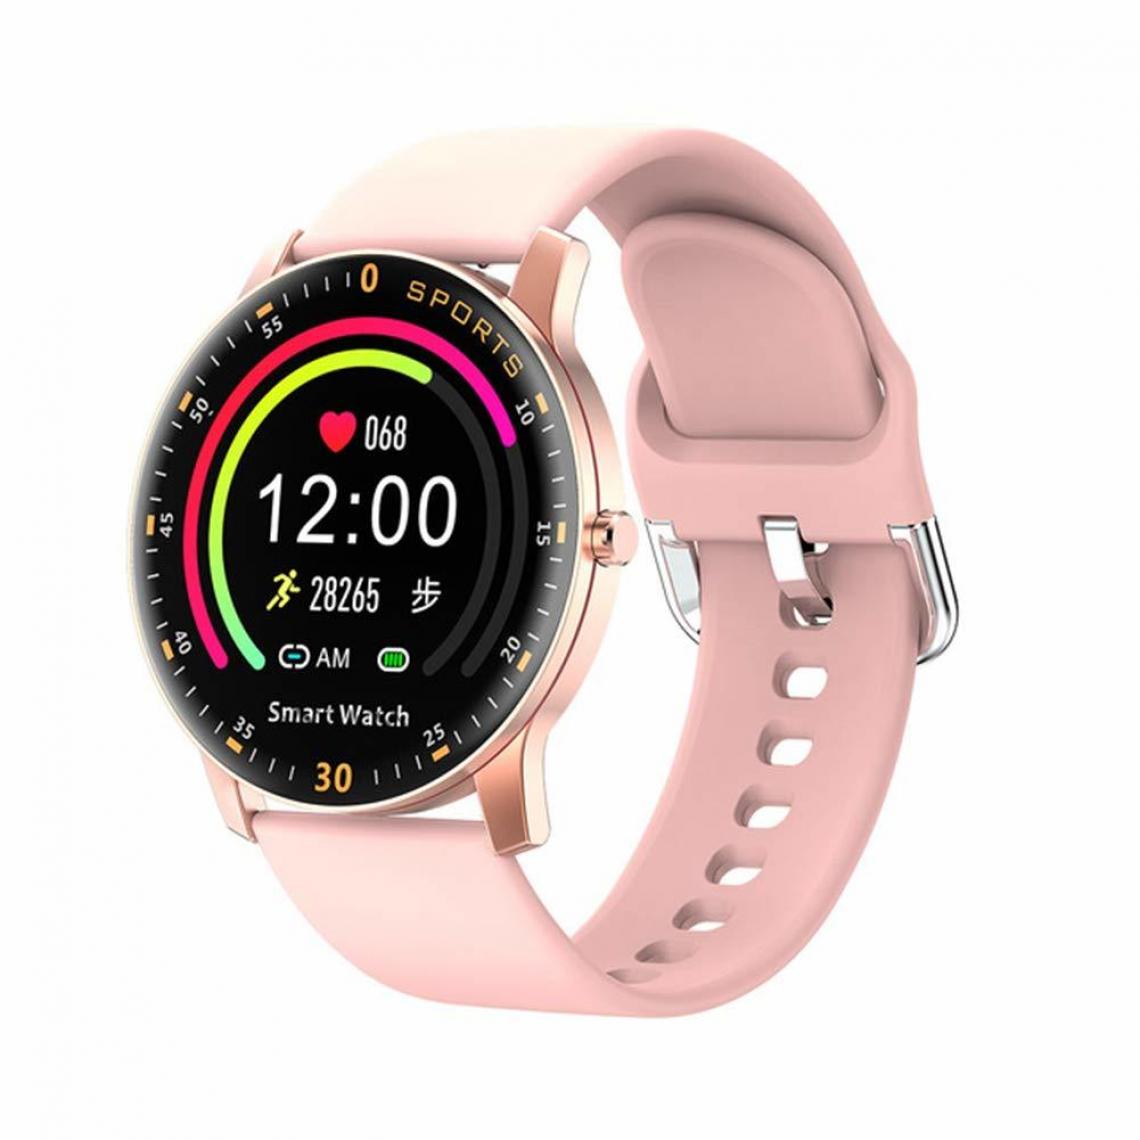 Chronotech Montres - Fitness Tracker Smartwatches Pedometer Watch, Full Touch Color Screen Wearable Activity Tracker Step Counter Sleep Monitor for Kids Women Men(Rose) - Montre connectée